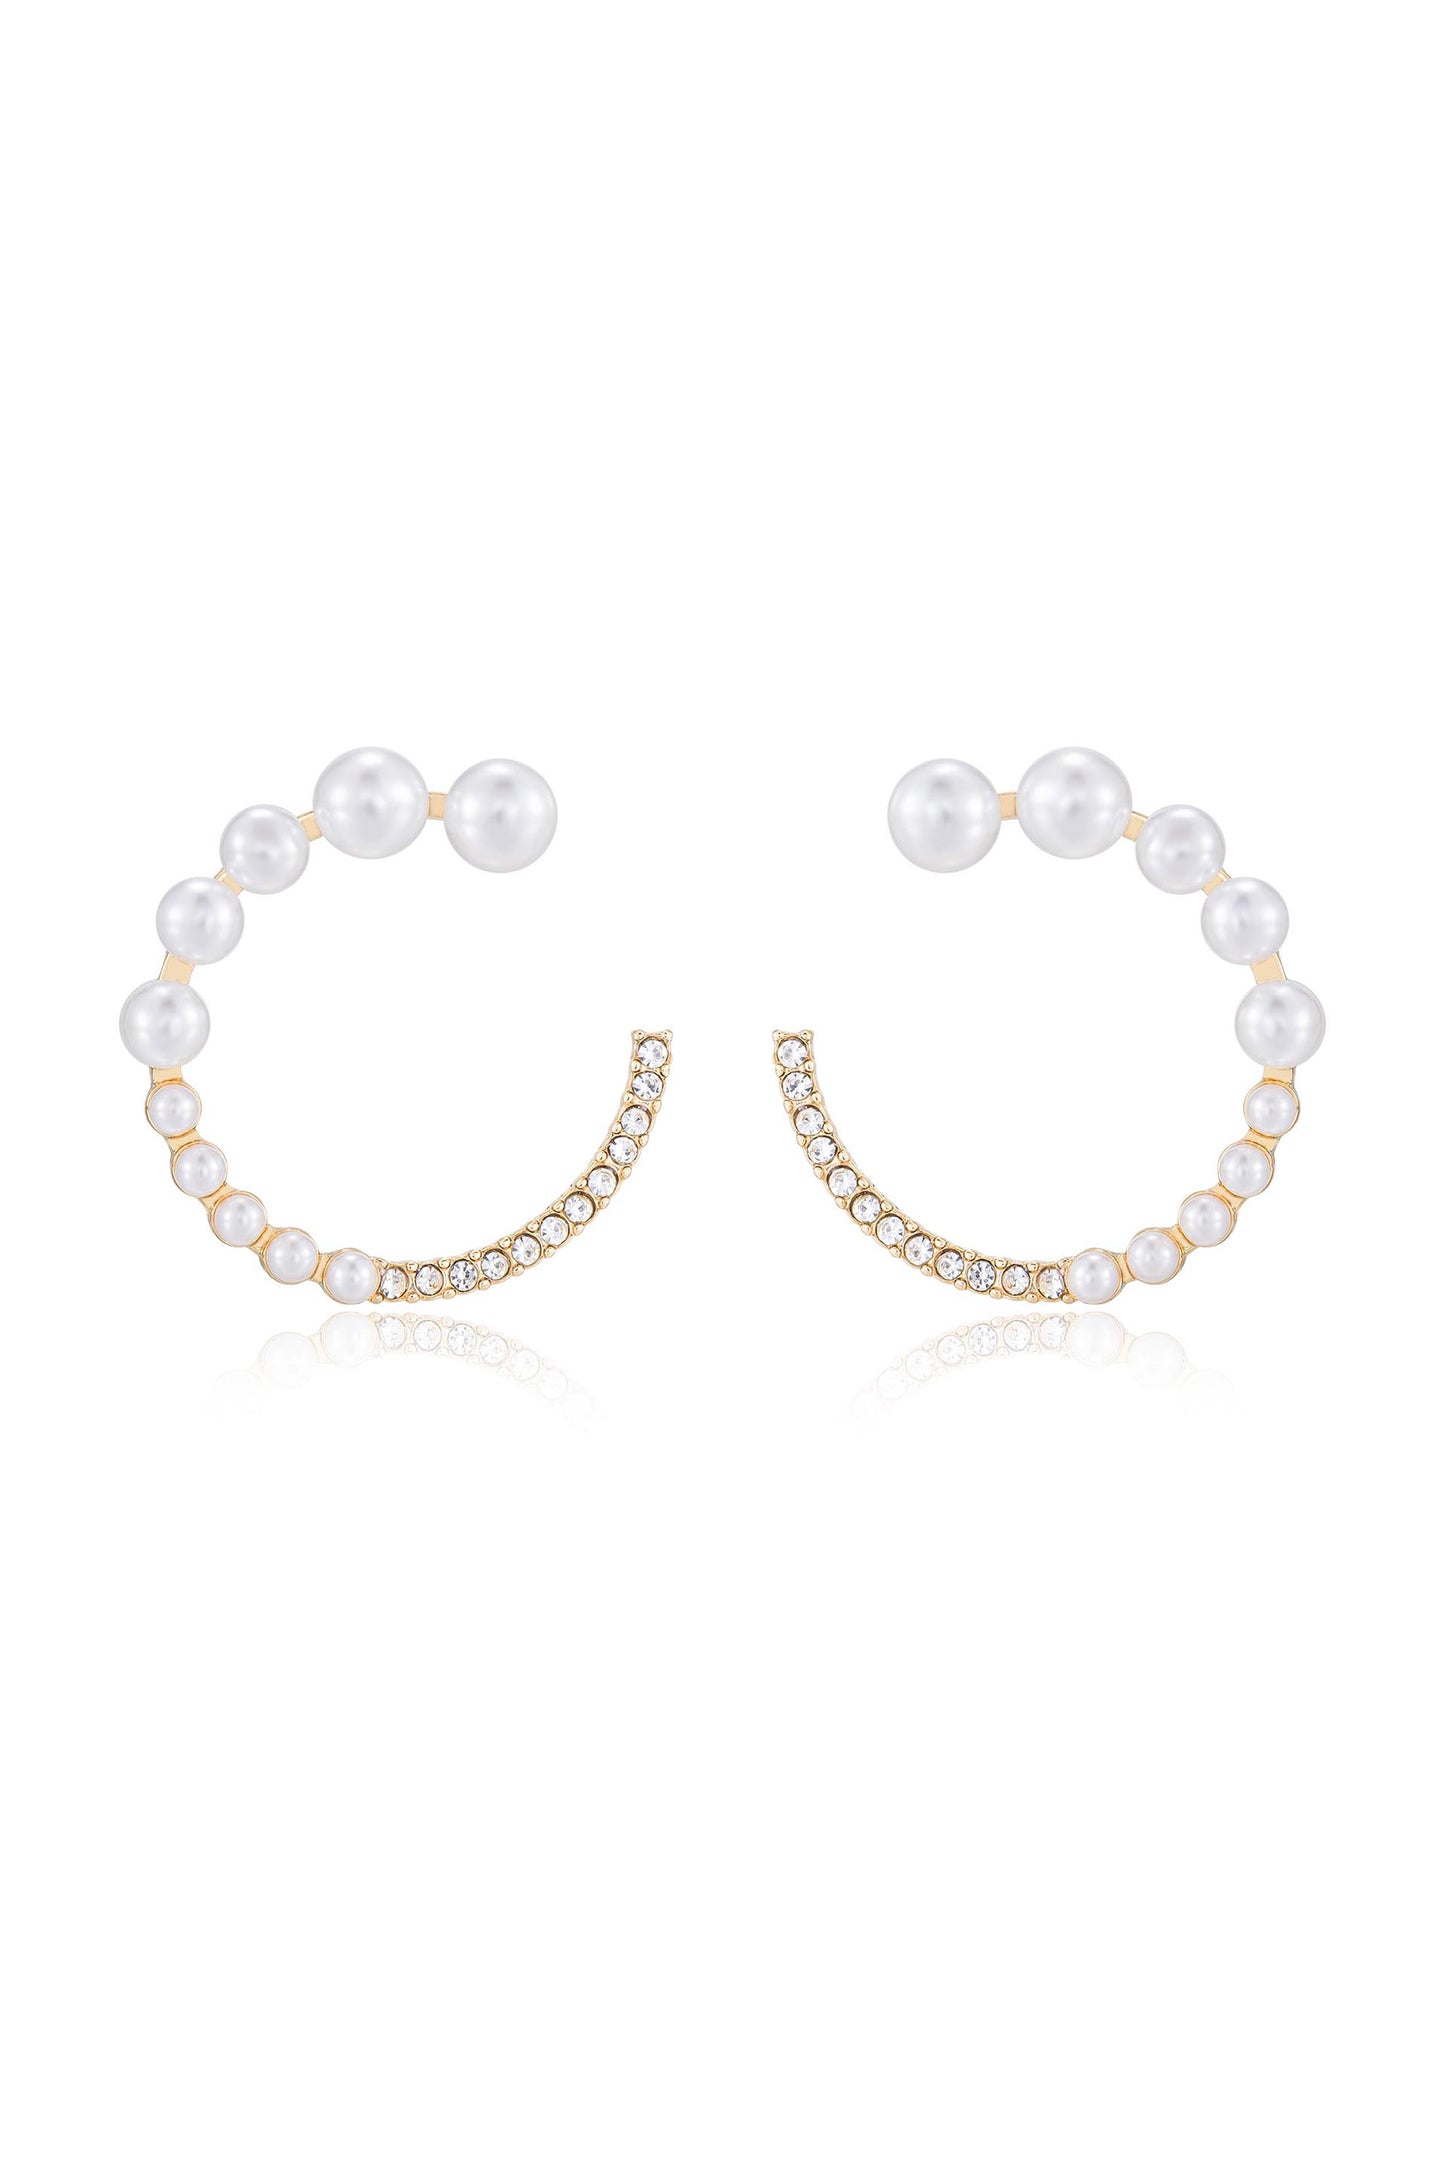 Chic Pearl And Crystal 18k Gold Plated Open Circle Earrings